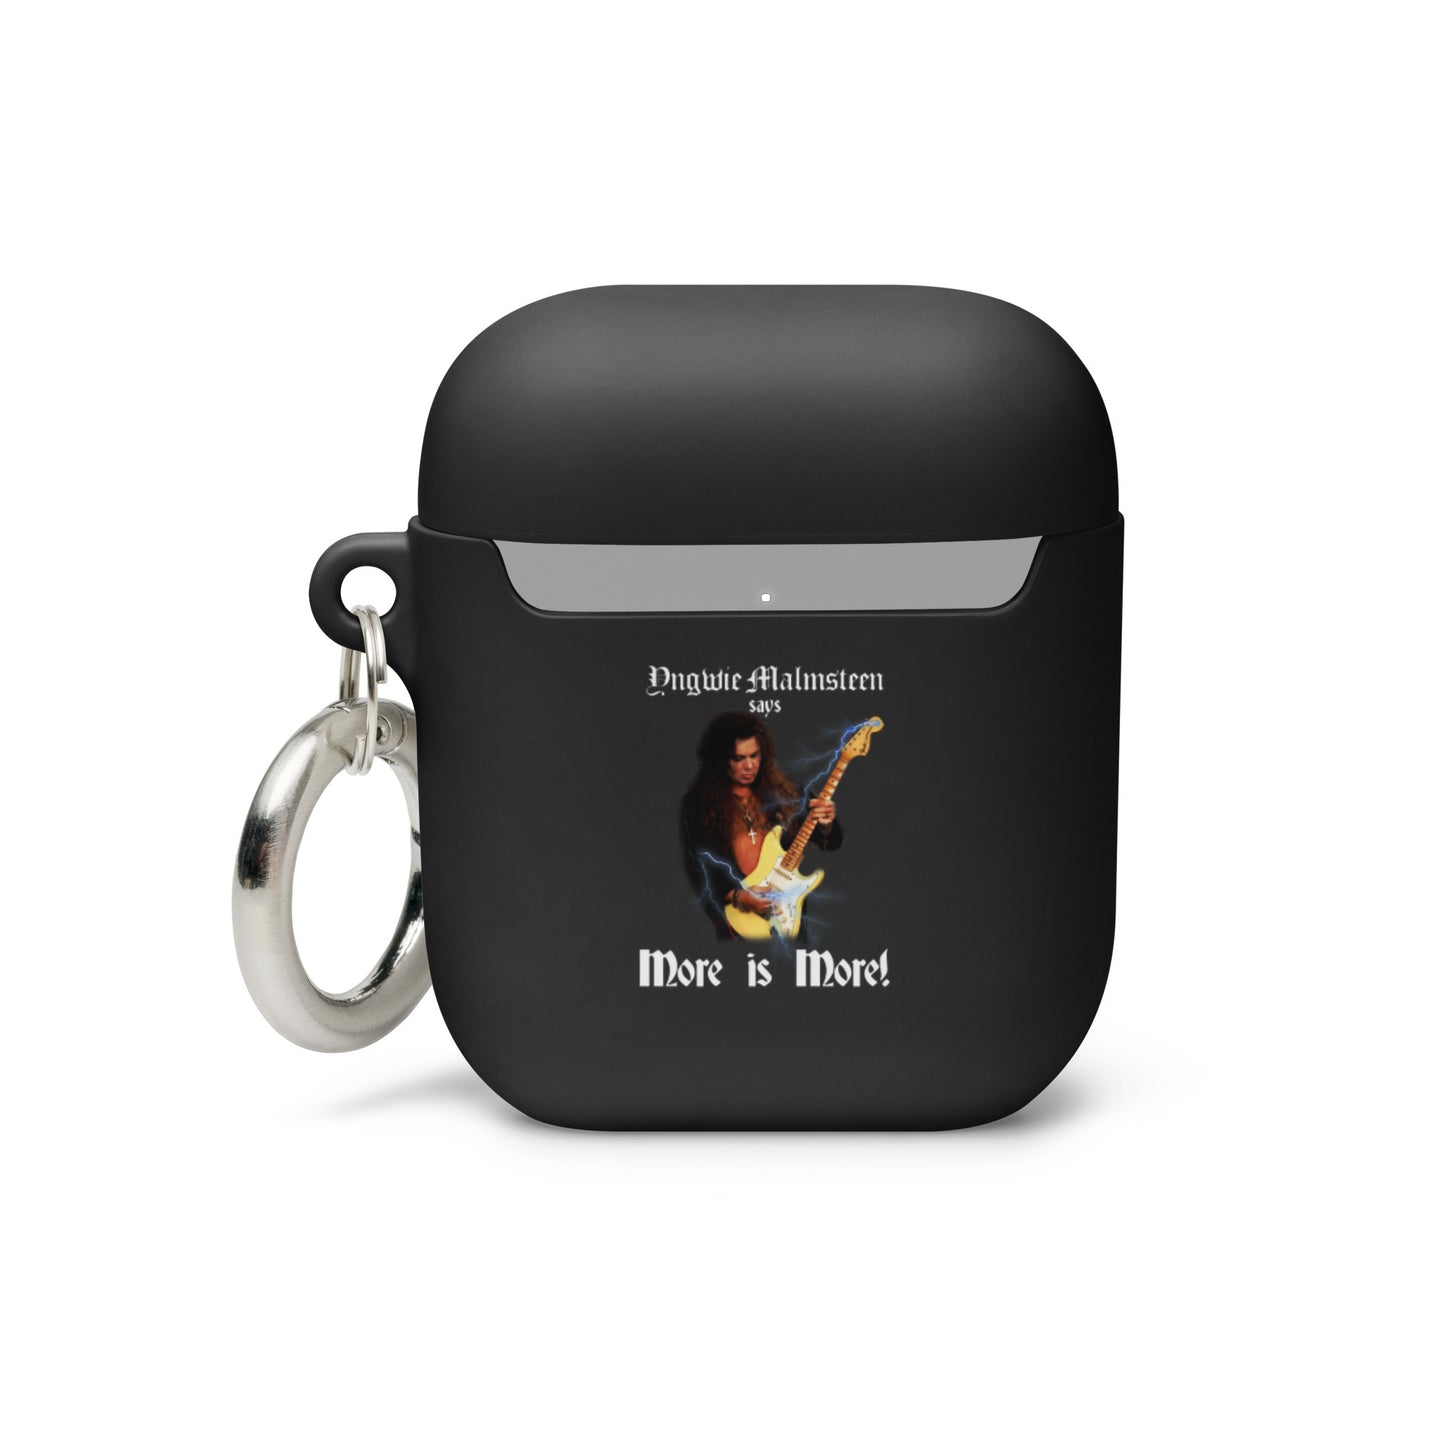 Yngwie Malmsteen - More is More AirPods case